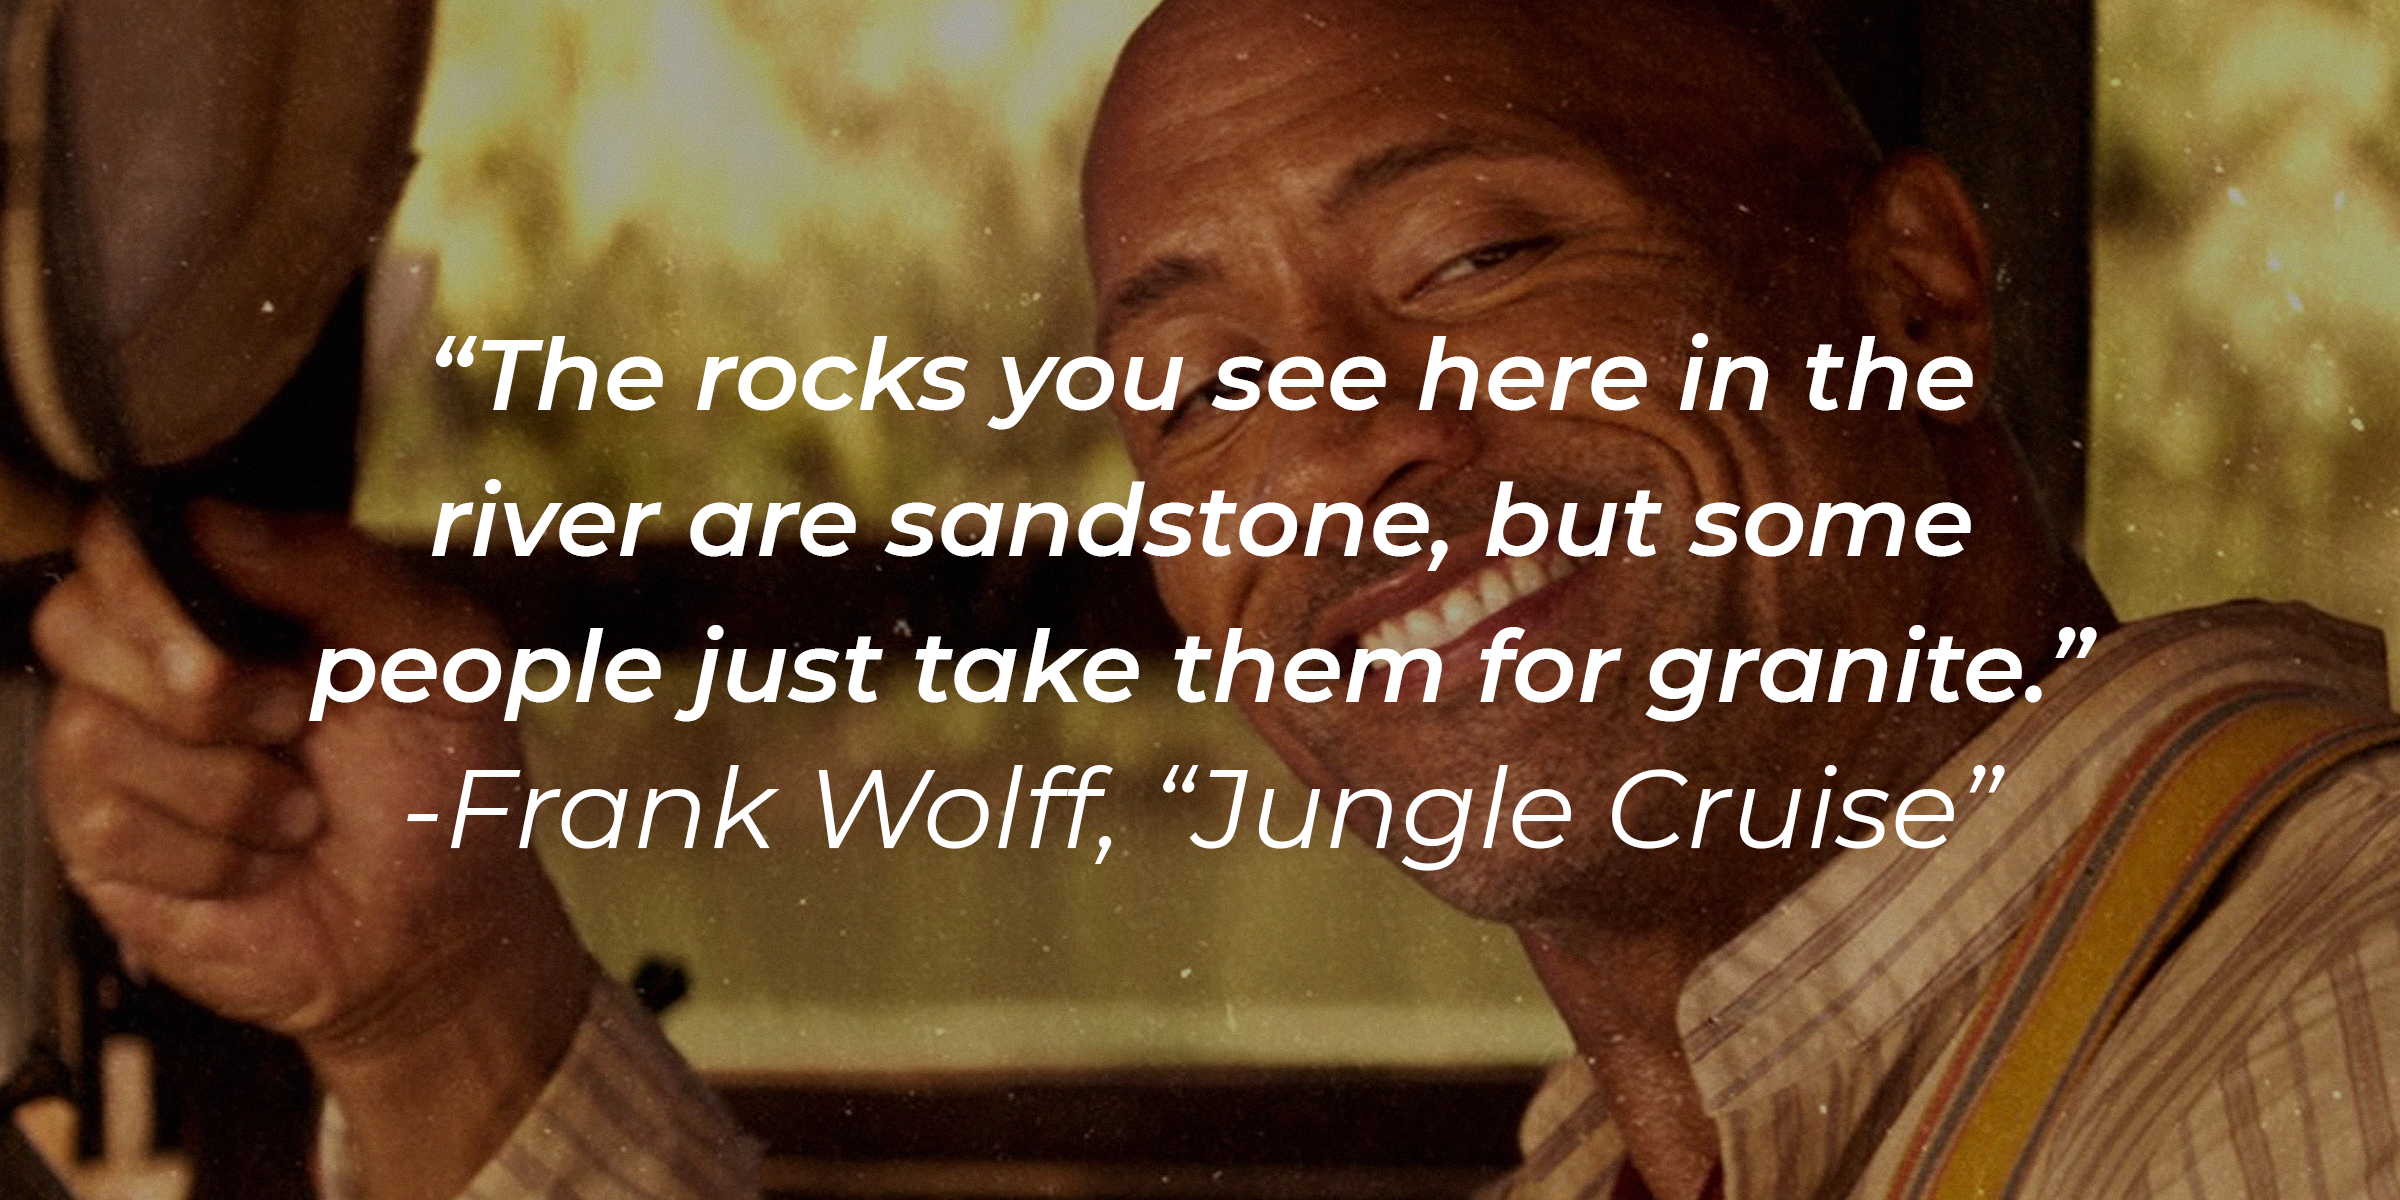 Frank Wolff’s quote: "The rocks you see here in the river are sandstone, but some people just take them for granite." | Source: facebook.com/JungleCruise